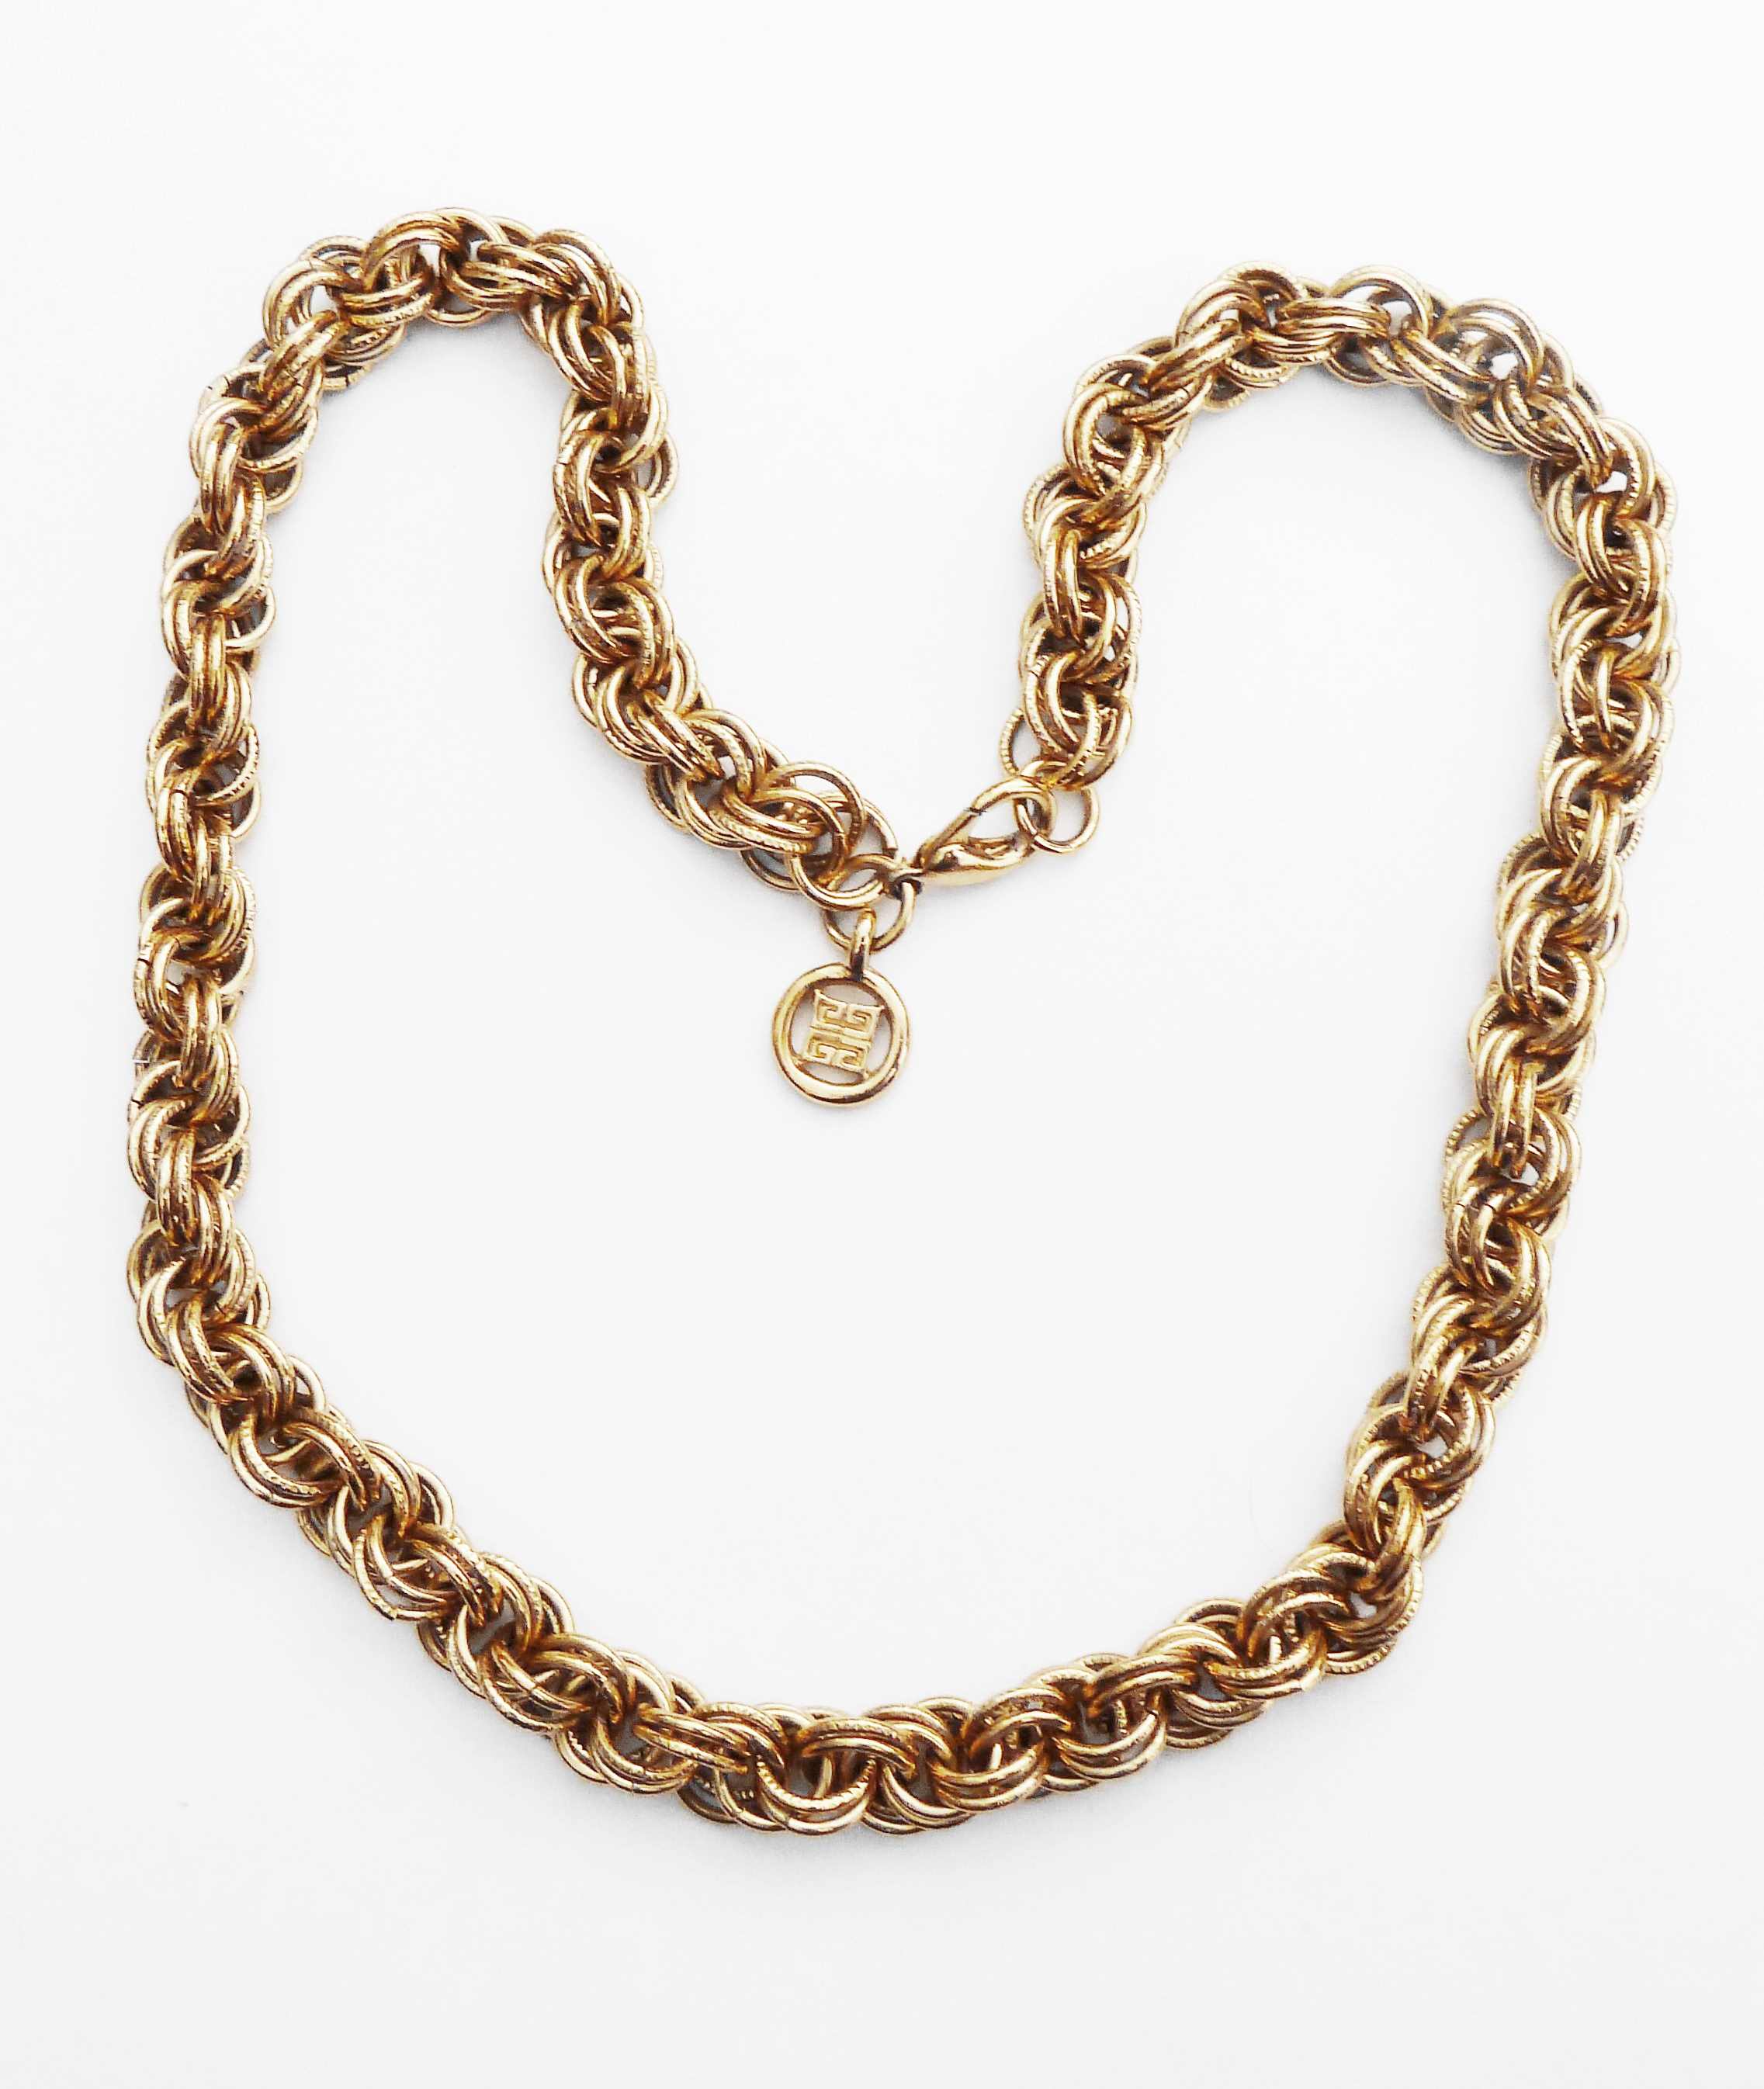 Givenchy gold tone links chain necklace